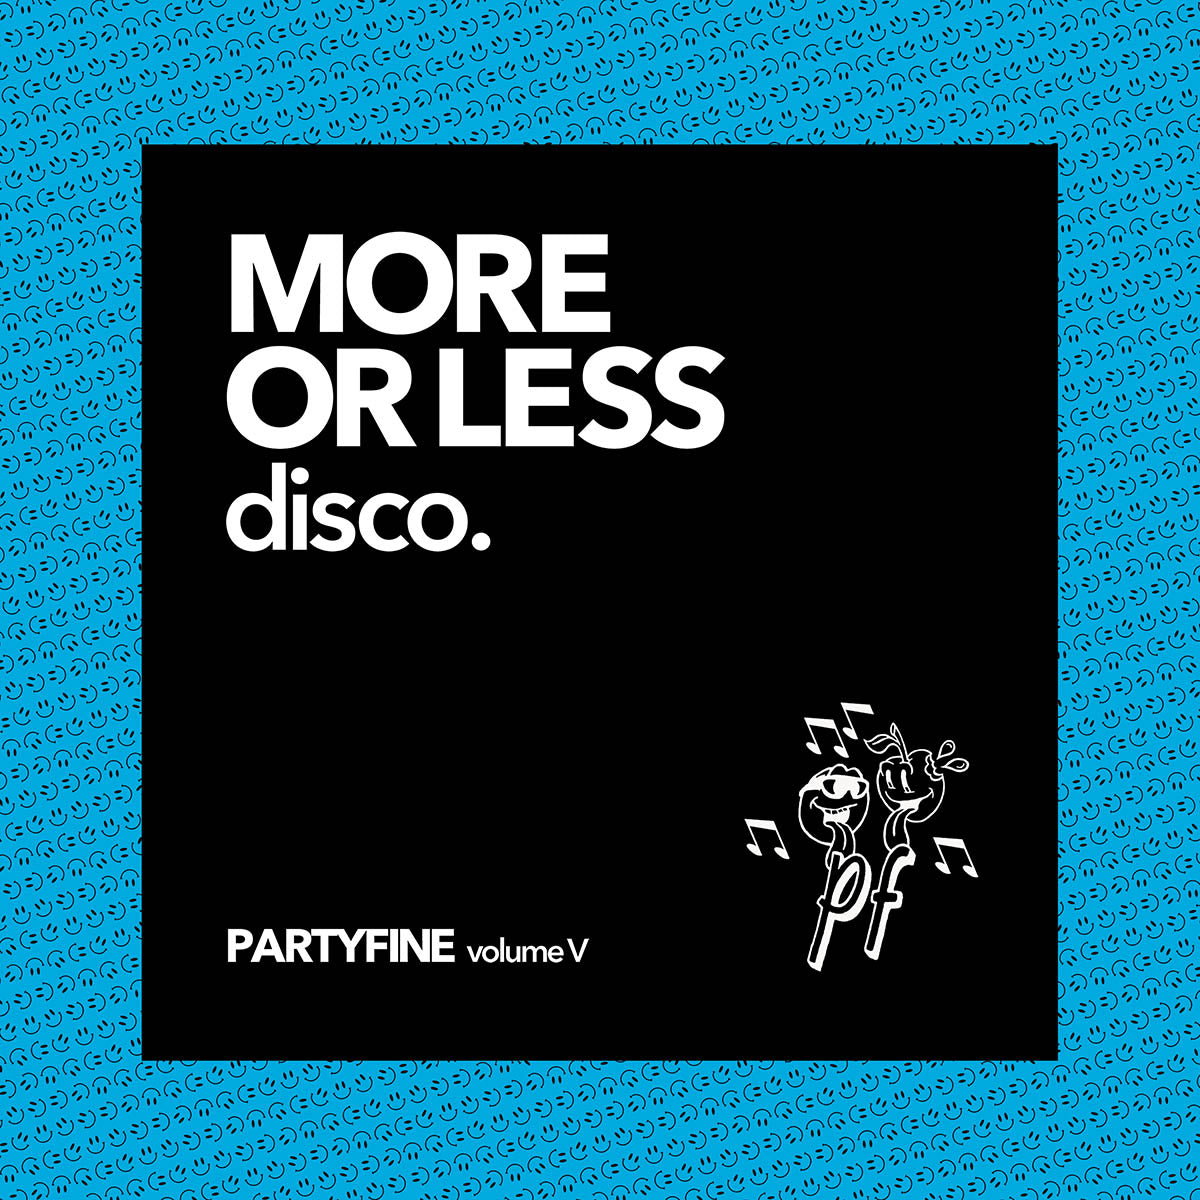 More Or Less Disco